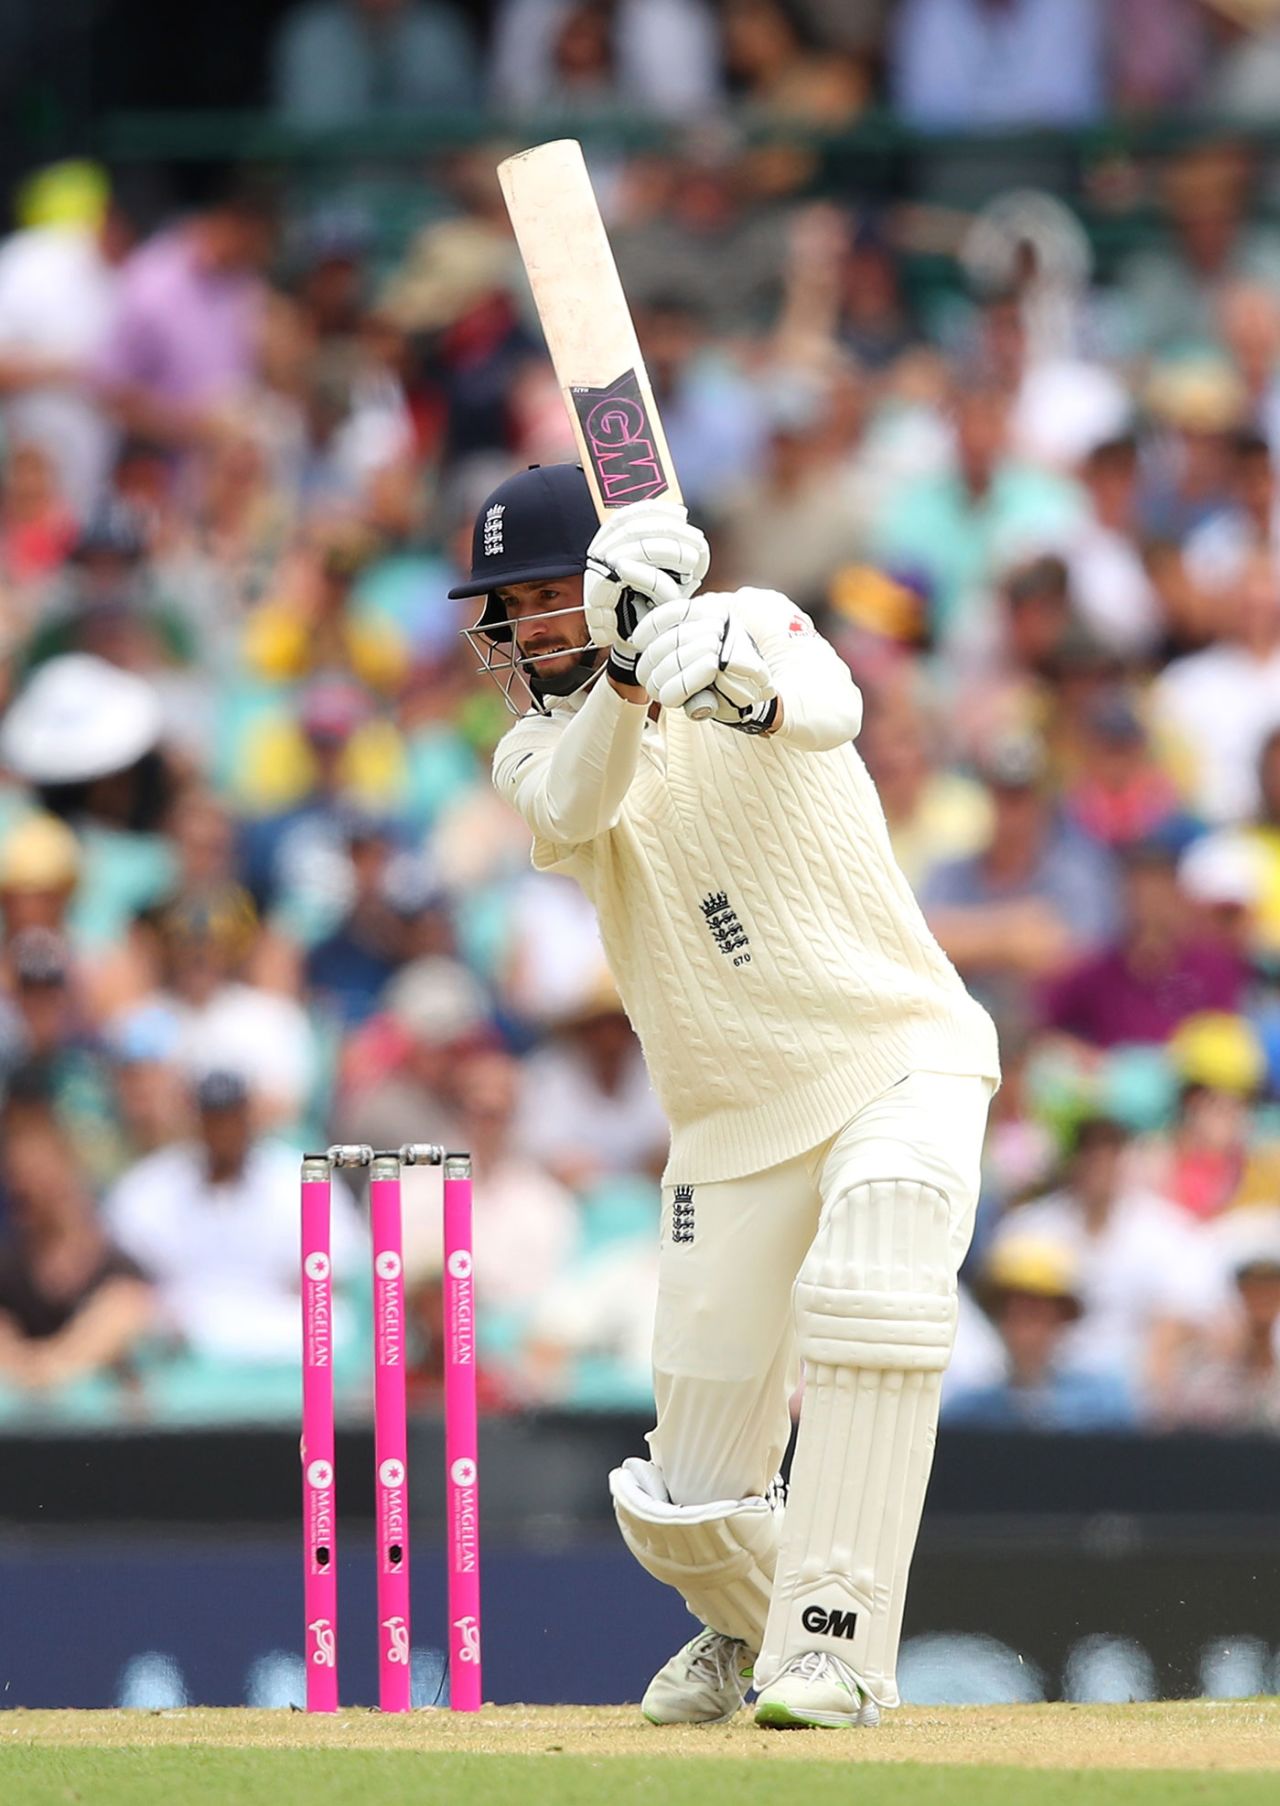 James Vince plays one of his trademark drives, Australia v England, 5th Ashes Test, Sydney, 1st day, January 4, 2018